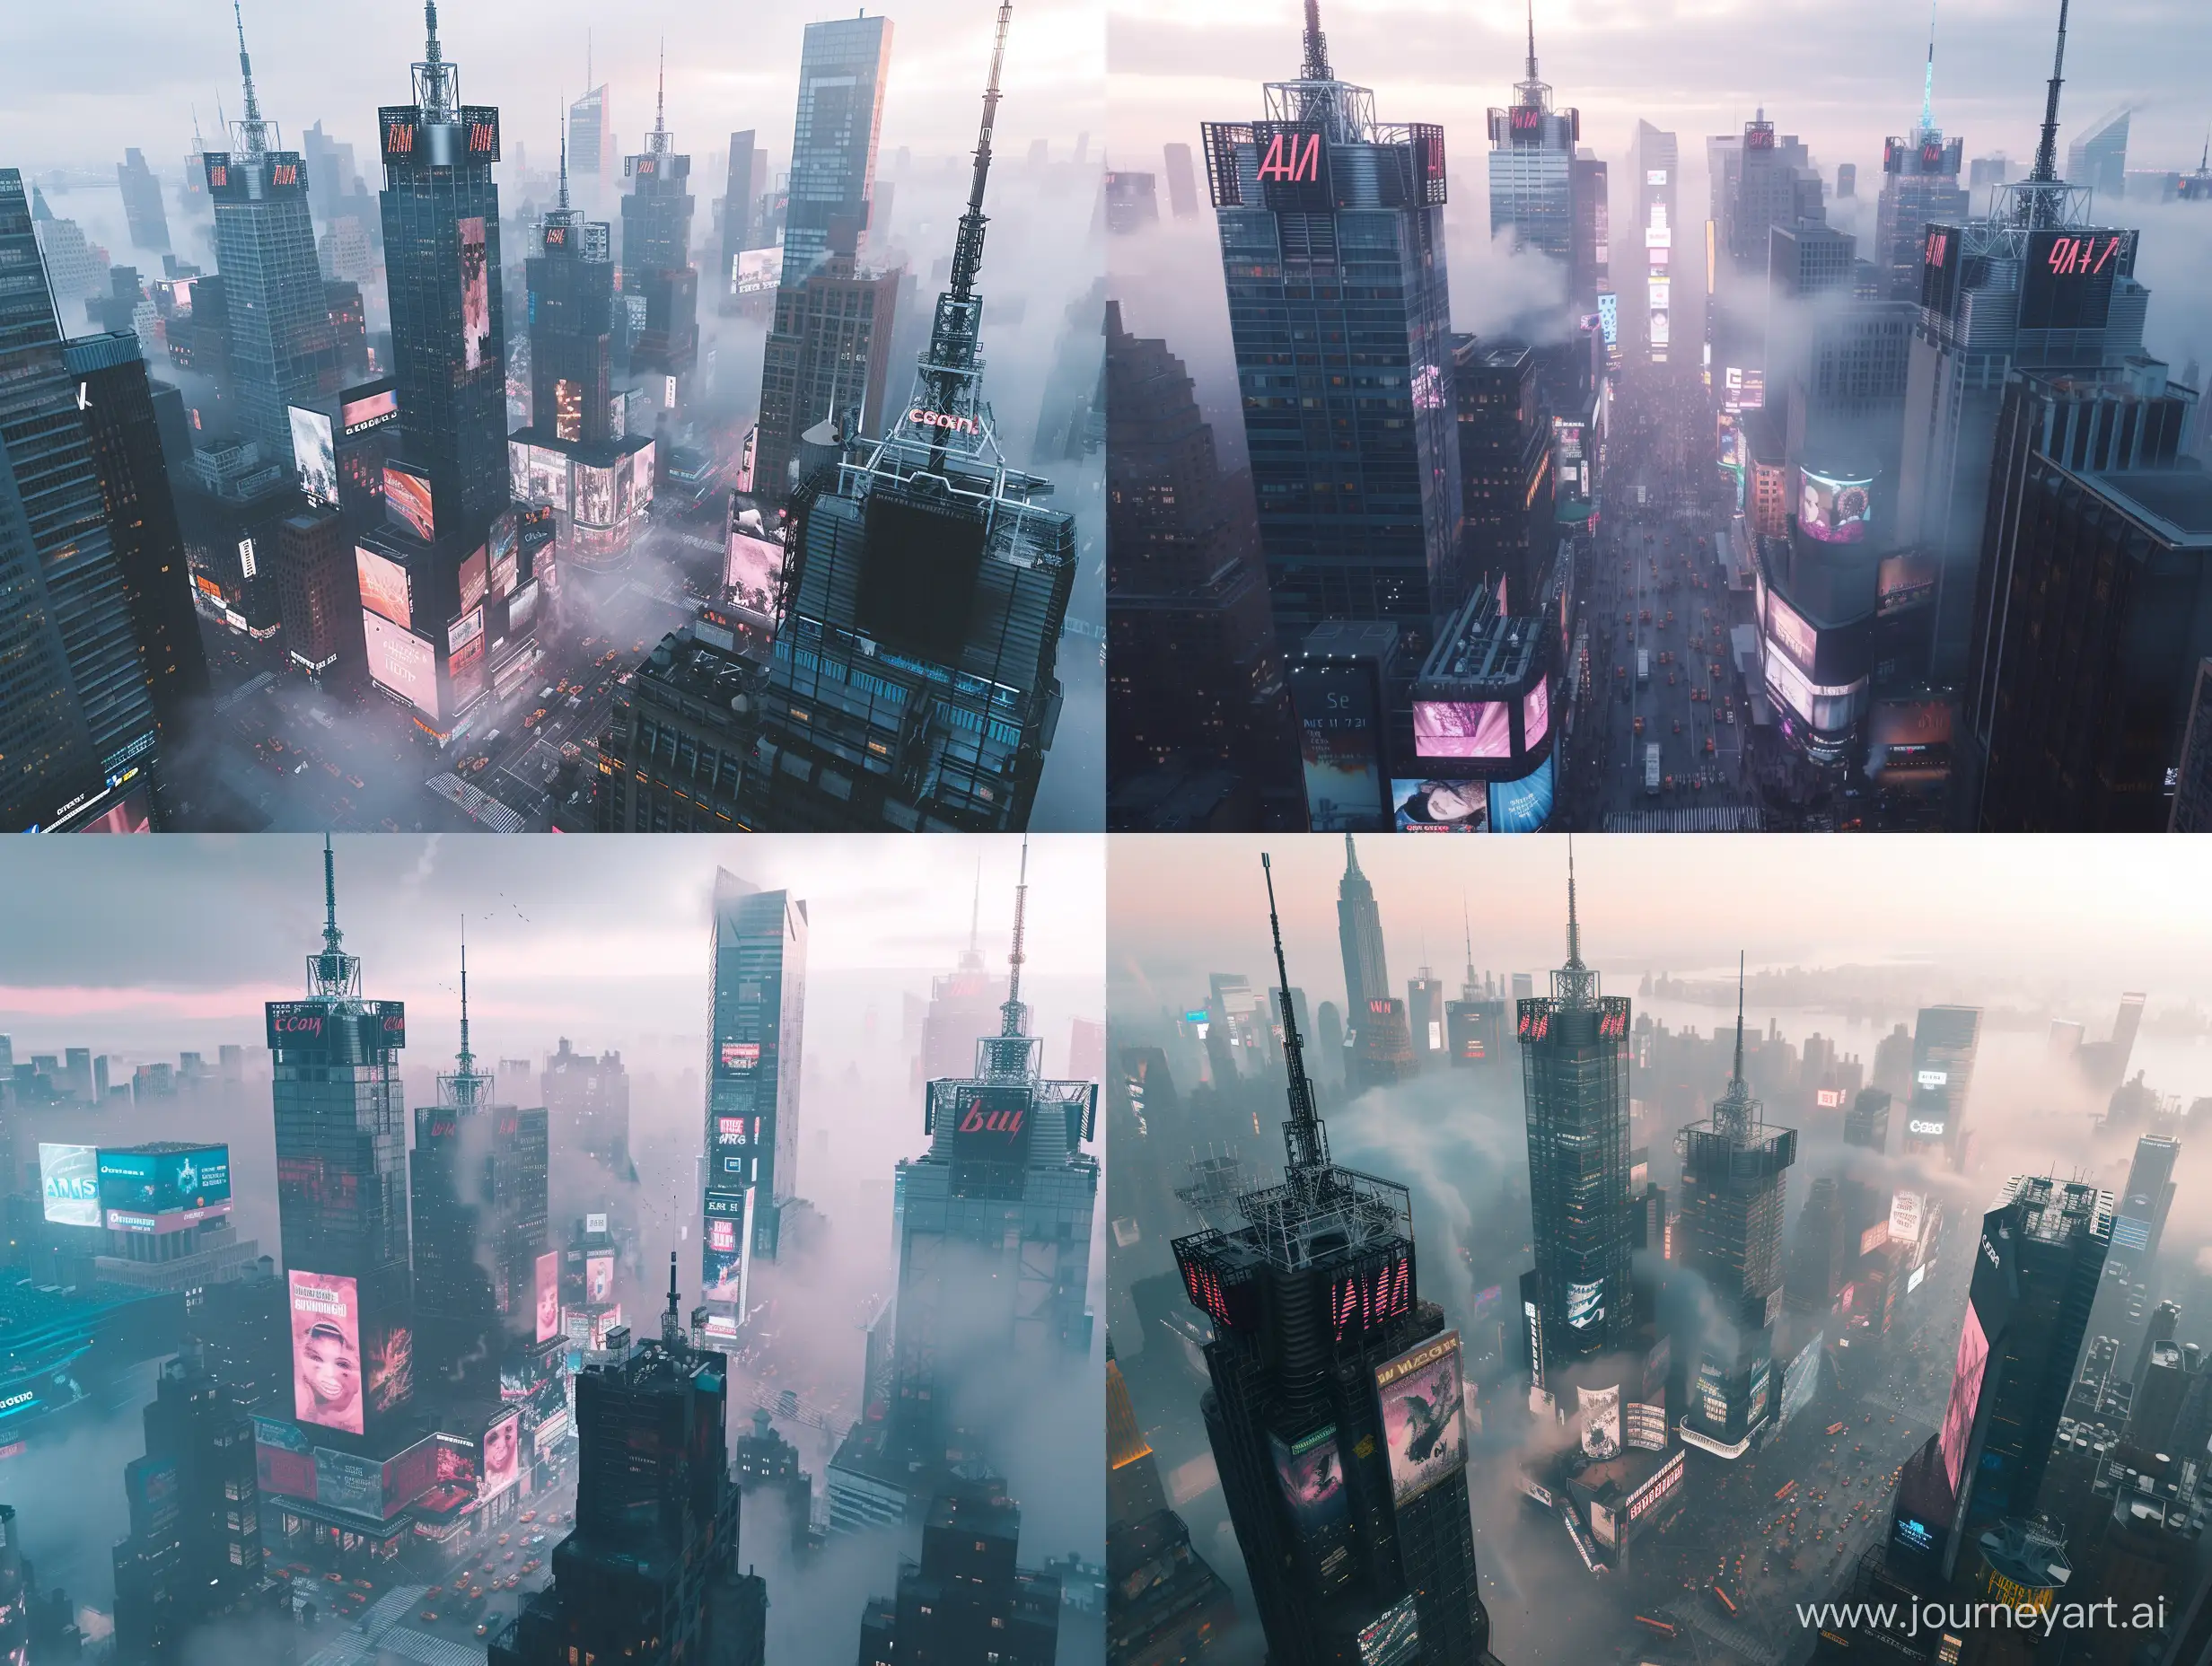 a bustling Procedural new york cityscape, the photo is bathed in natural lighting, relaxing setting. Shot in 4k with a high end DSLR camera. such as a Canon EOS R5 with a 50mm f/1. 2 lens, architectures, drone view, skyline, vivid, foggy, dystopian, science fiction, skyline, billboards, nature, year 2100 futuristic 
